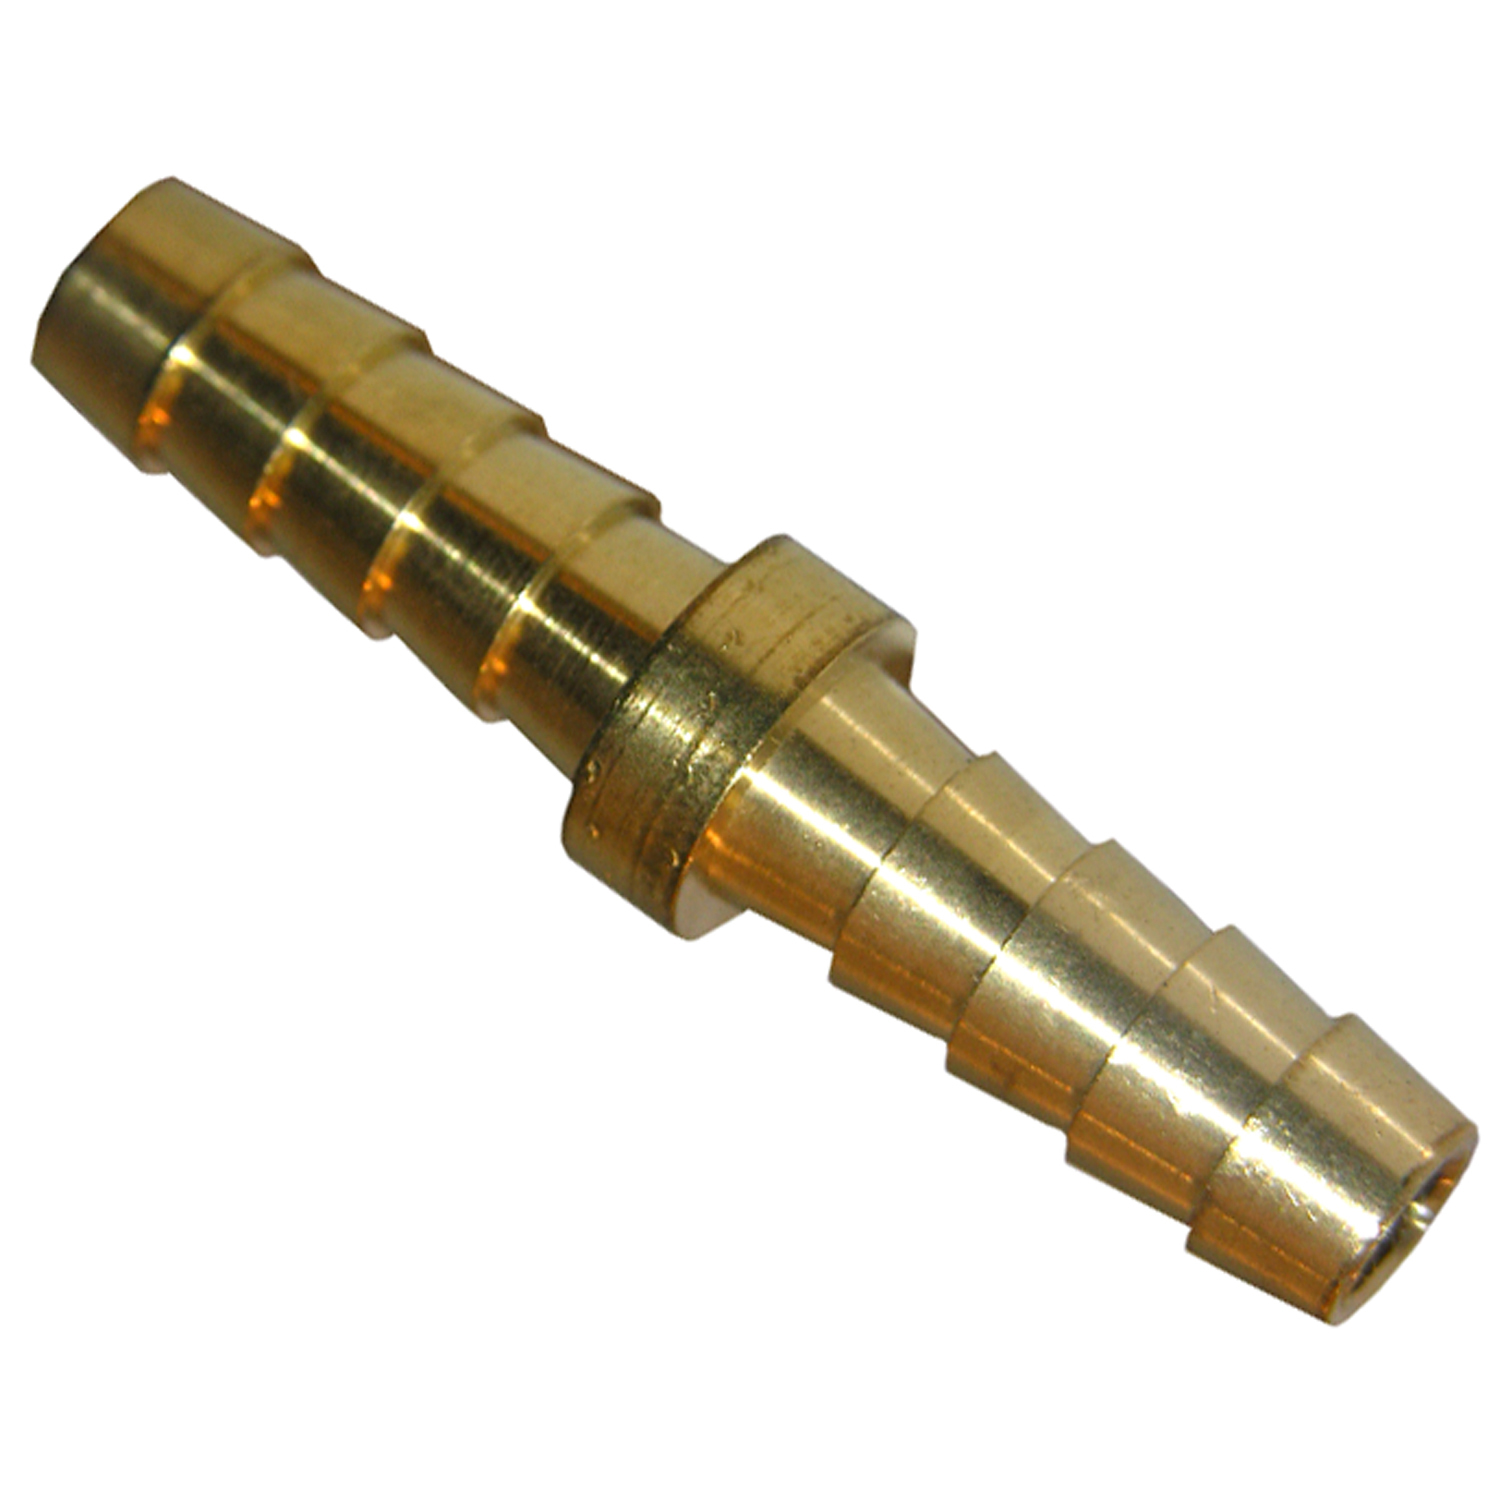 17-7517 Coupling, 5/16 in, Barb, Brass